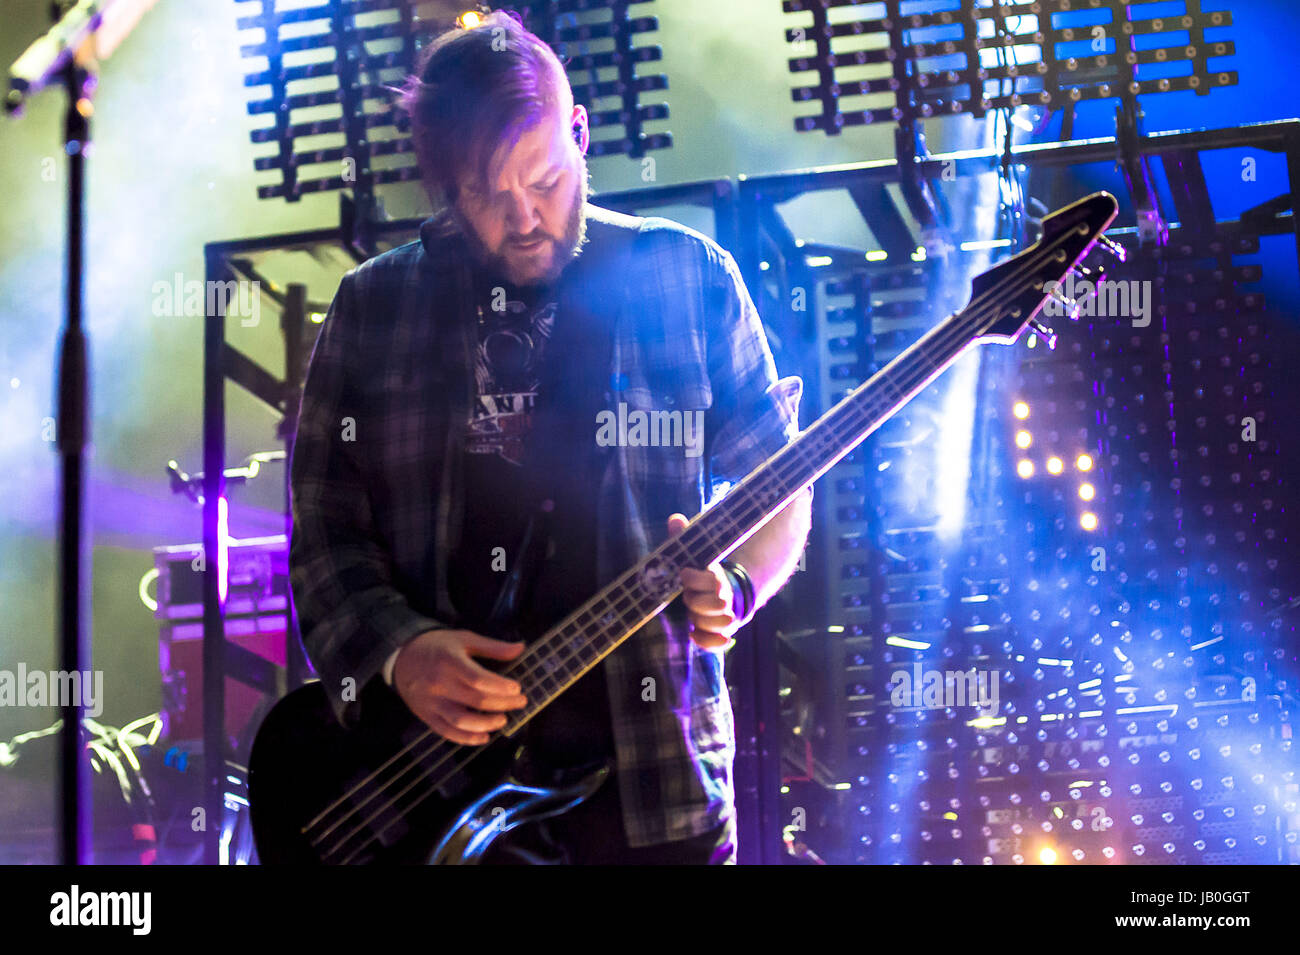 Anaheim, Anaheim, USA. 6th June, 2017. Dale Stewart of Seether, a South African rock band founded in May 1999 in Pretoria, Gauteng, South Africa makes a stop on their current 2017 world tour at the House of Blues in Anaheim CA. Clint Lowery from Sevendust joins Seether as a touring guitarist. Credit: Dave Safley/ZUMA Wire/Alamy Live News Stock Photo